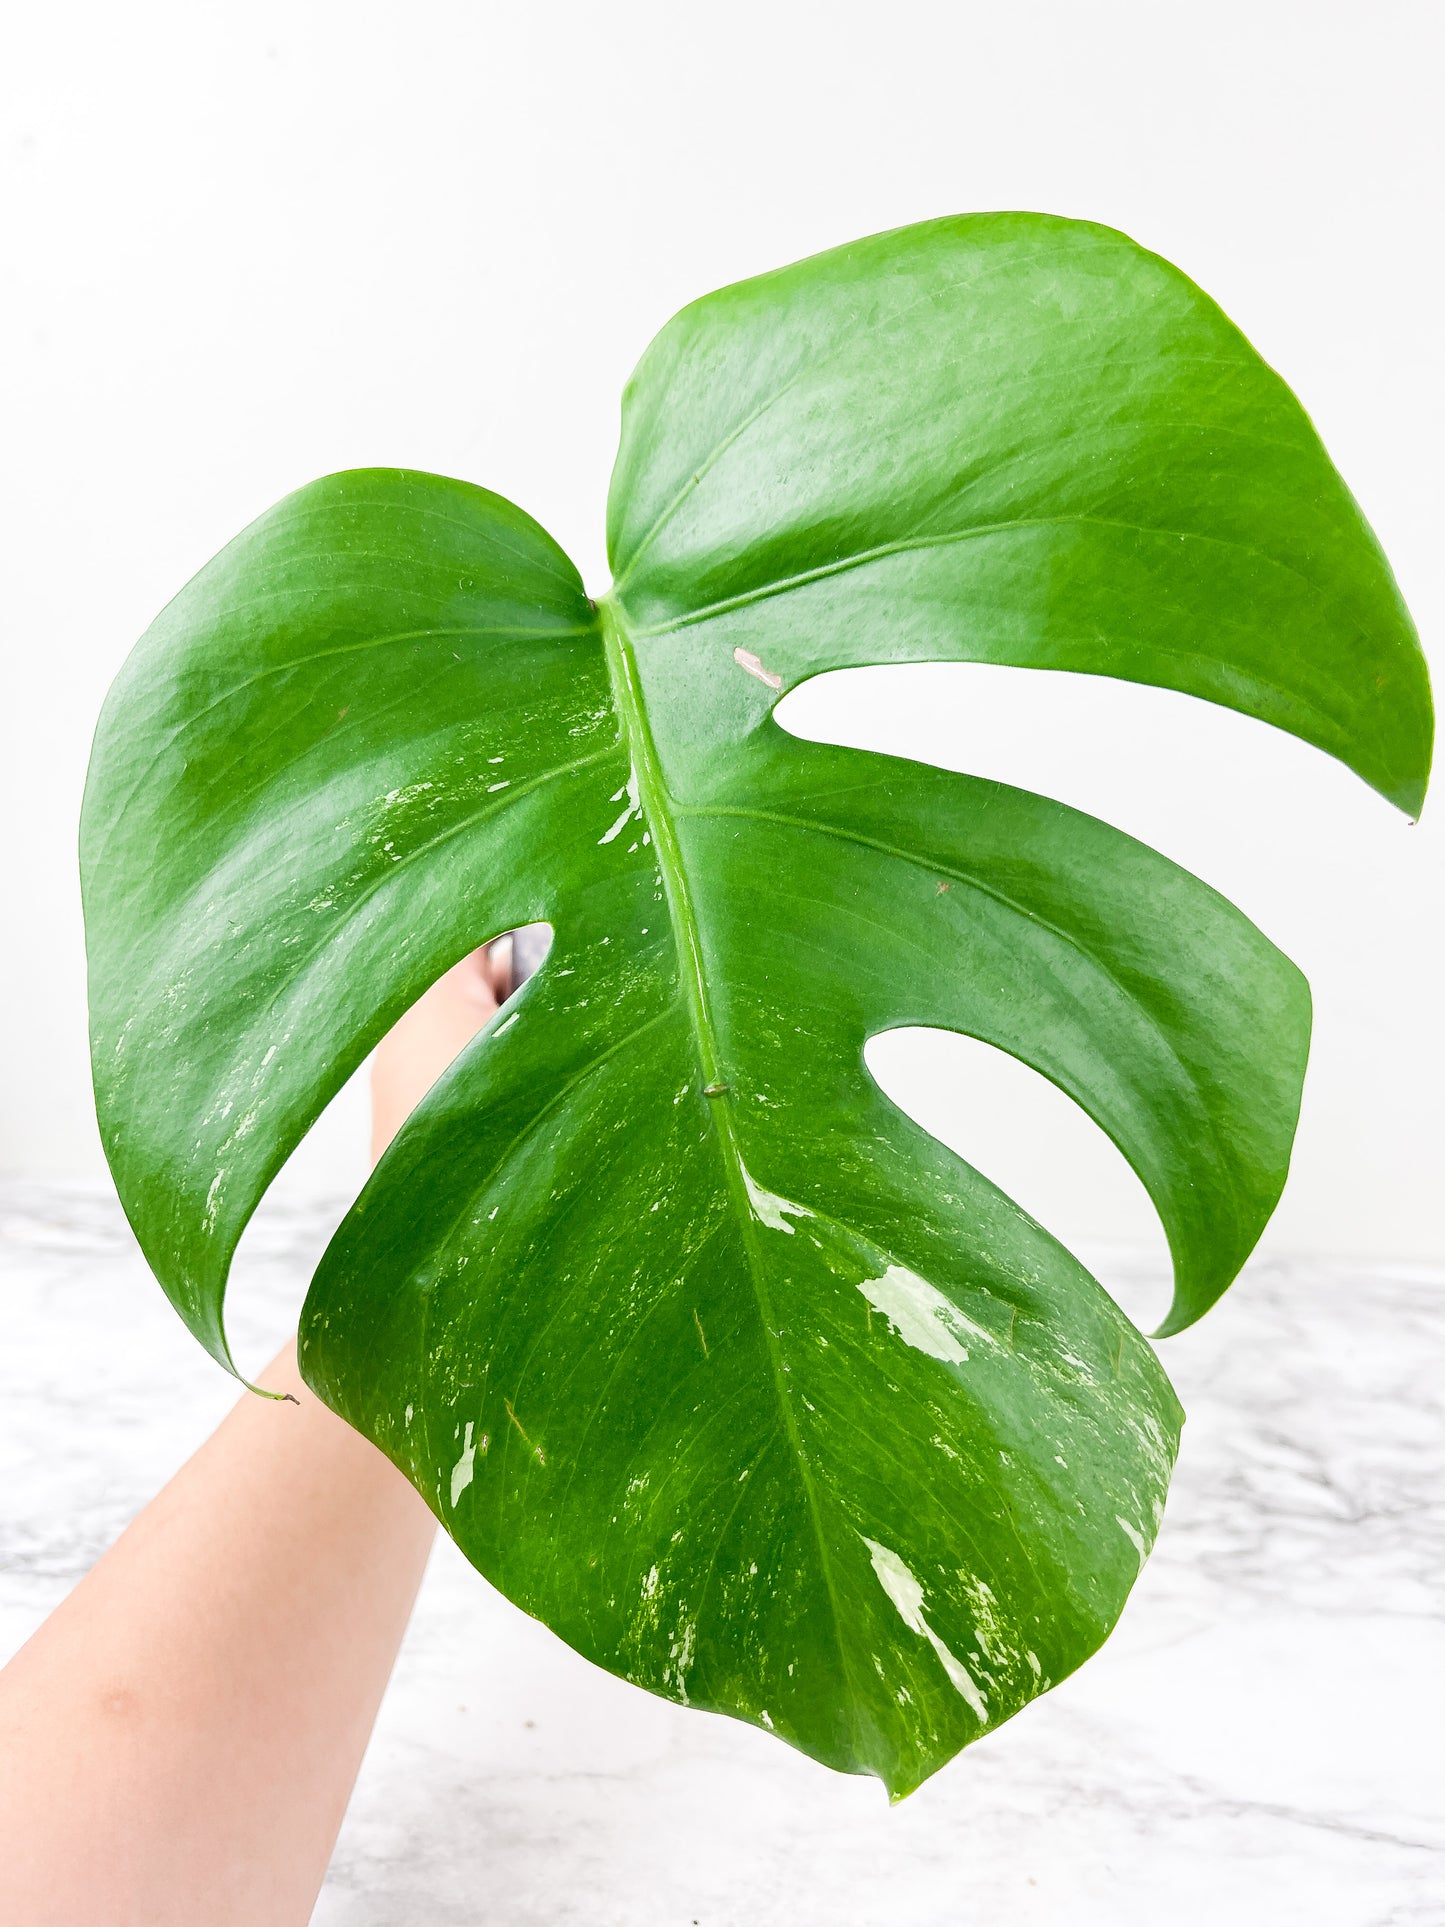 Monstera Albo Borsigiana1 leaf Rooted Coming from a rare selected  mother plant (Read description)